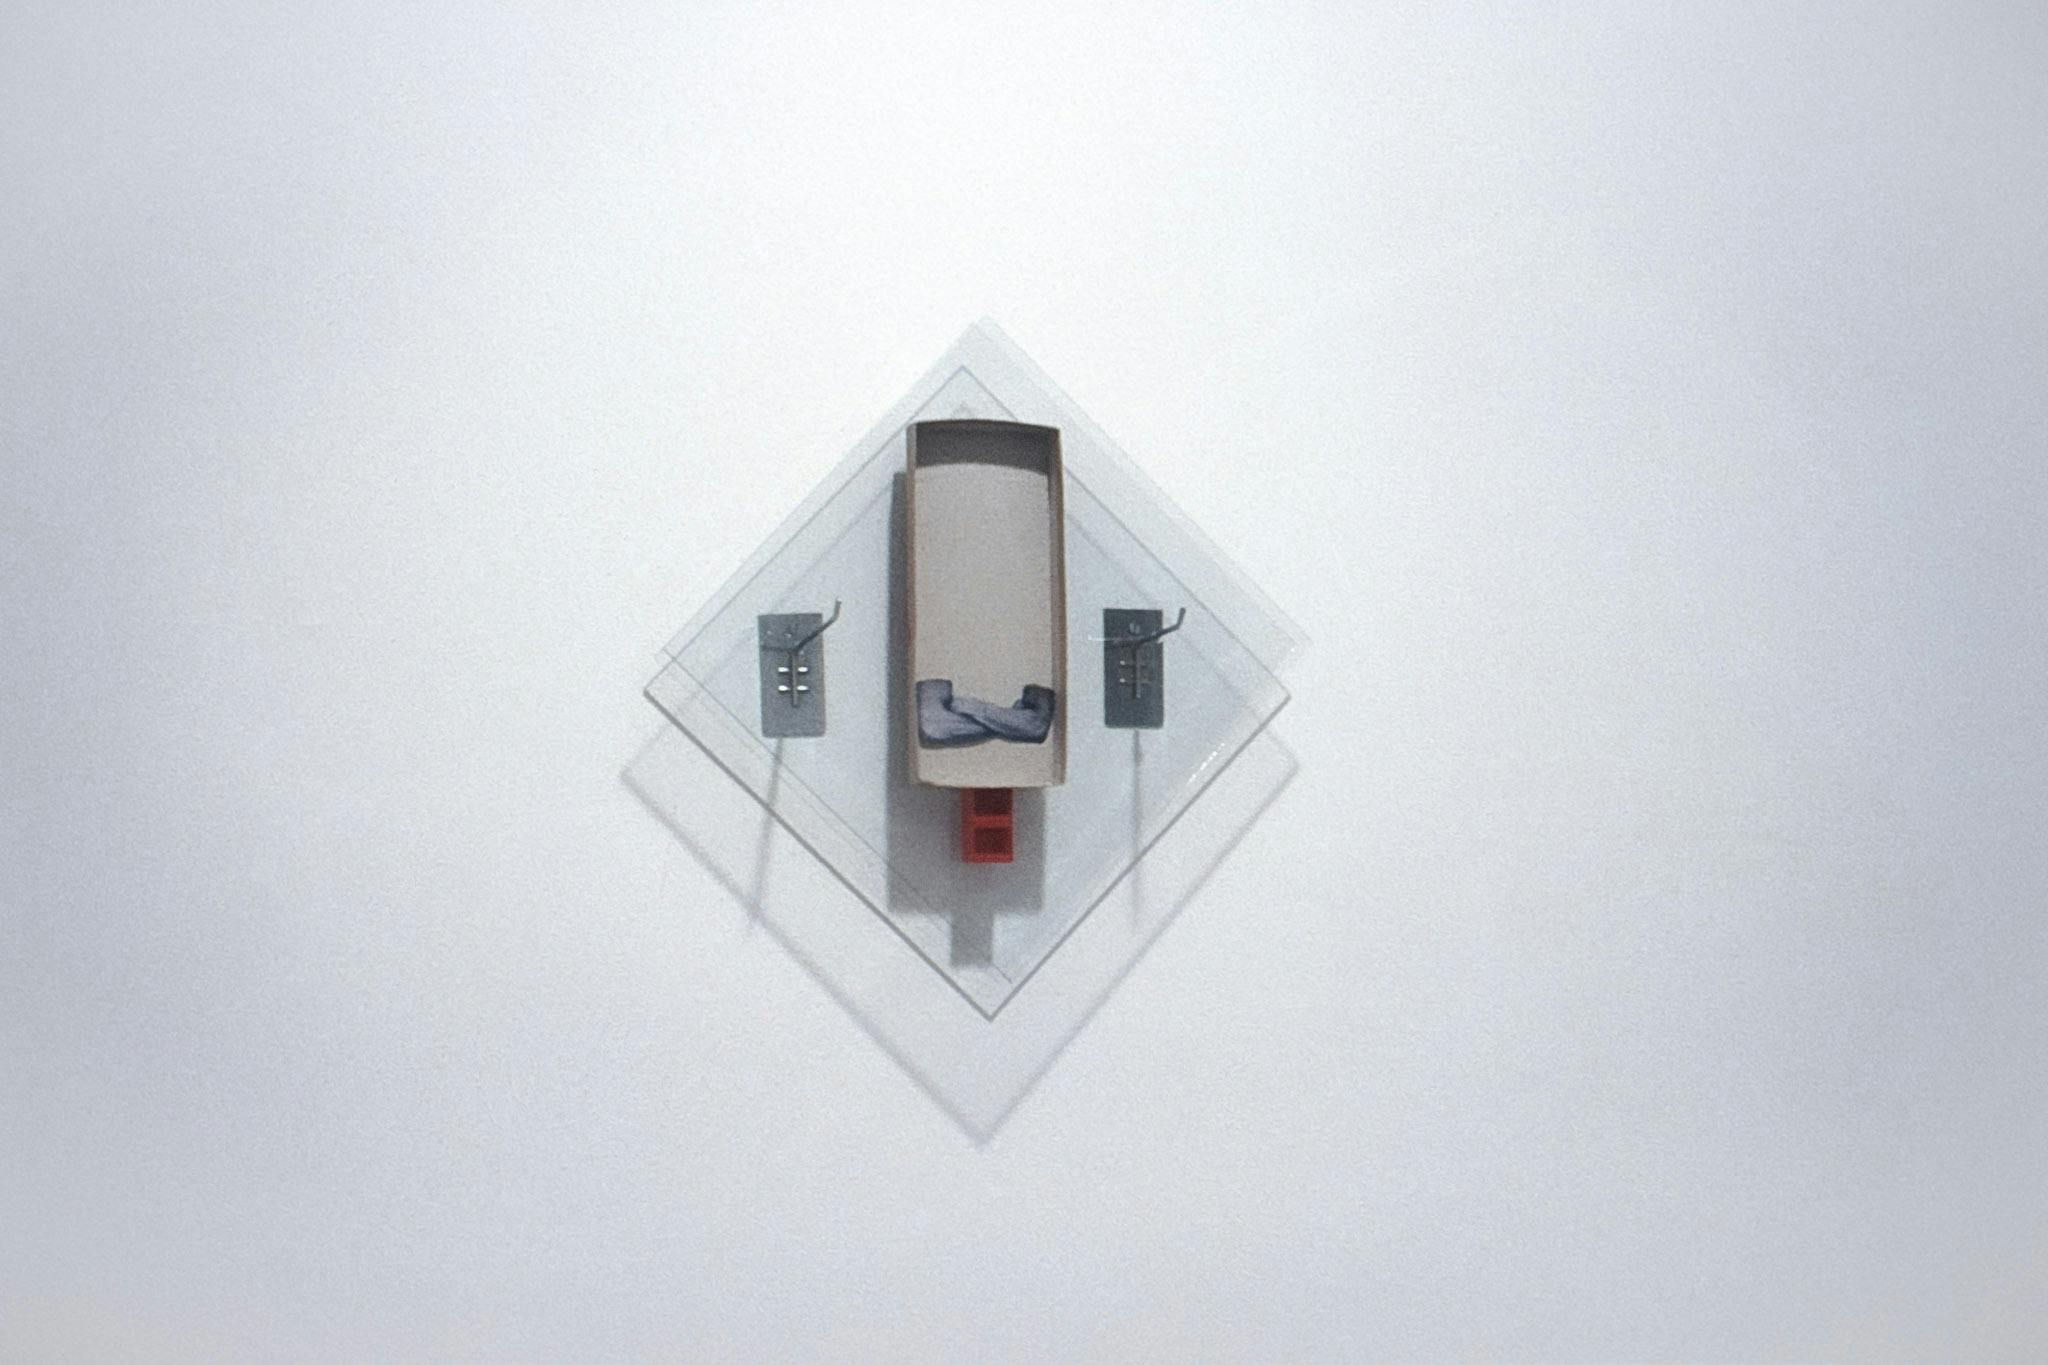 An artwork mounted on a white wall. The work is a piece of glass in a square diamond shape with a grey-brown rectangle and a red cylinder mounted on top. A photo of two crossed arms is pasted onto it. 